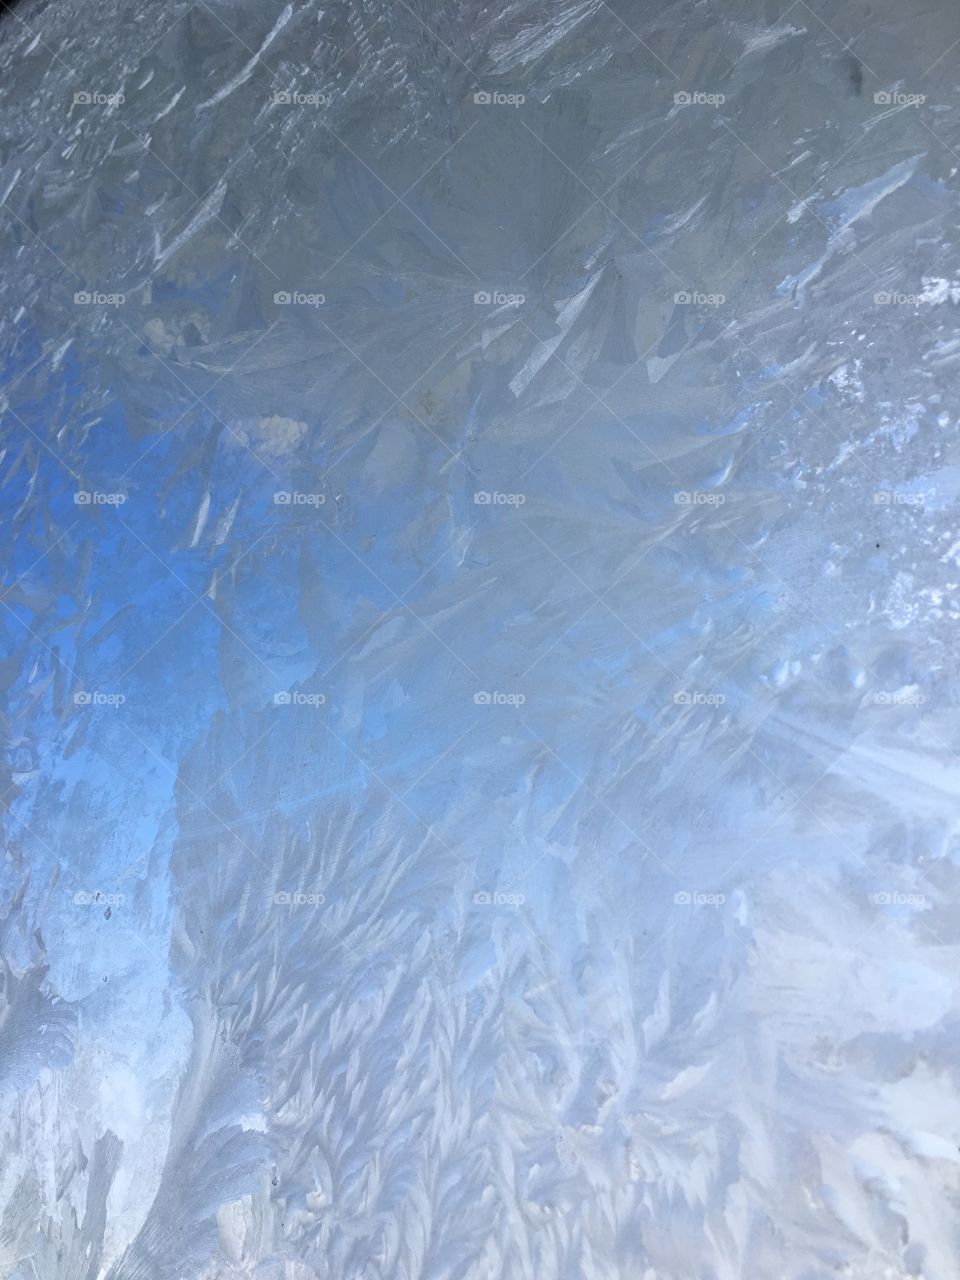 Ice that formed on a door